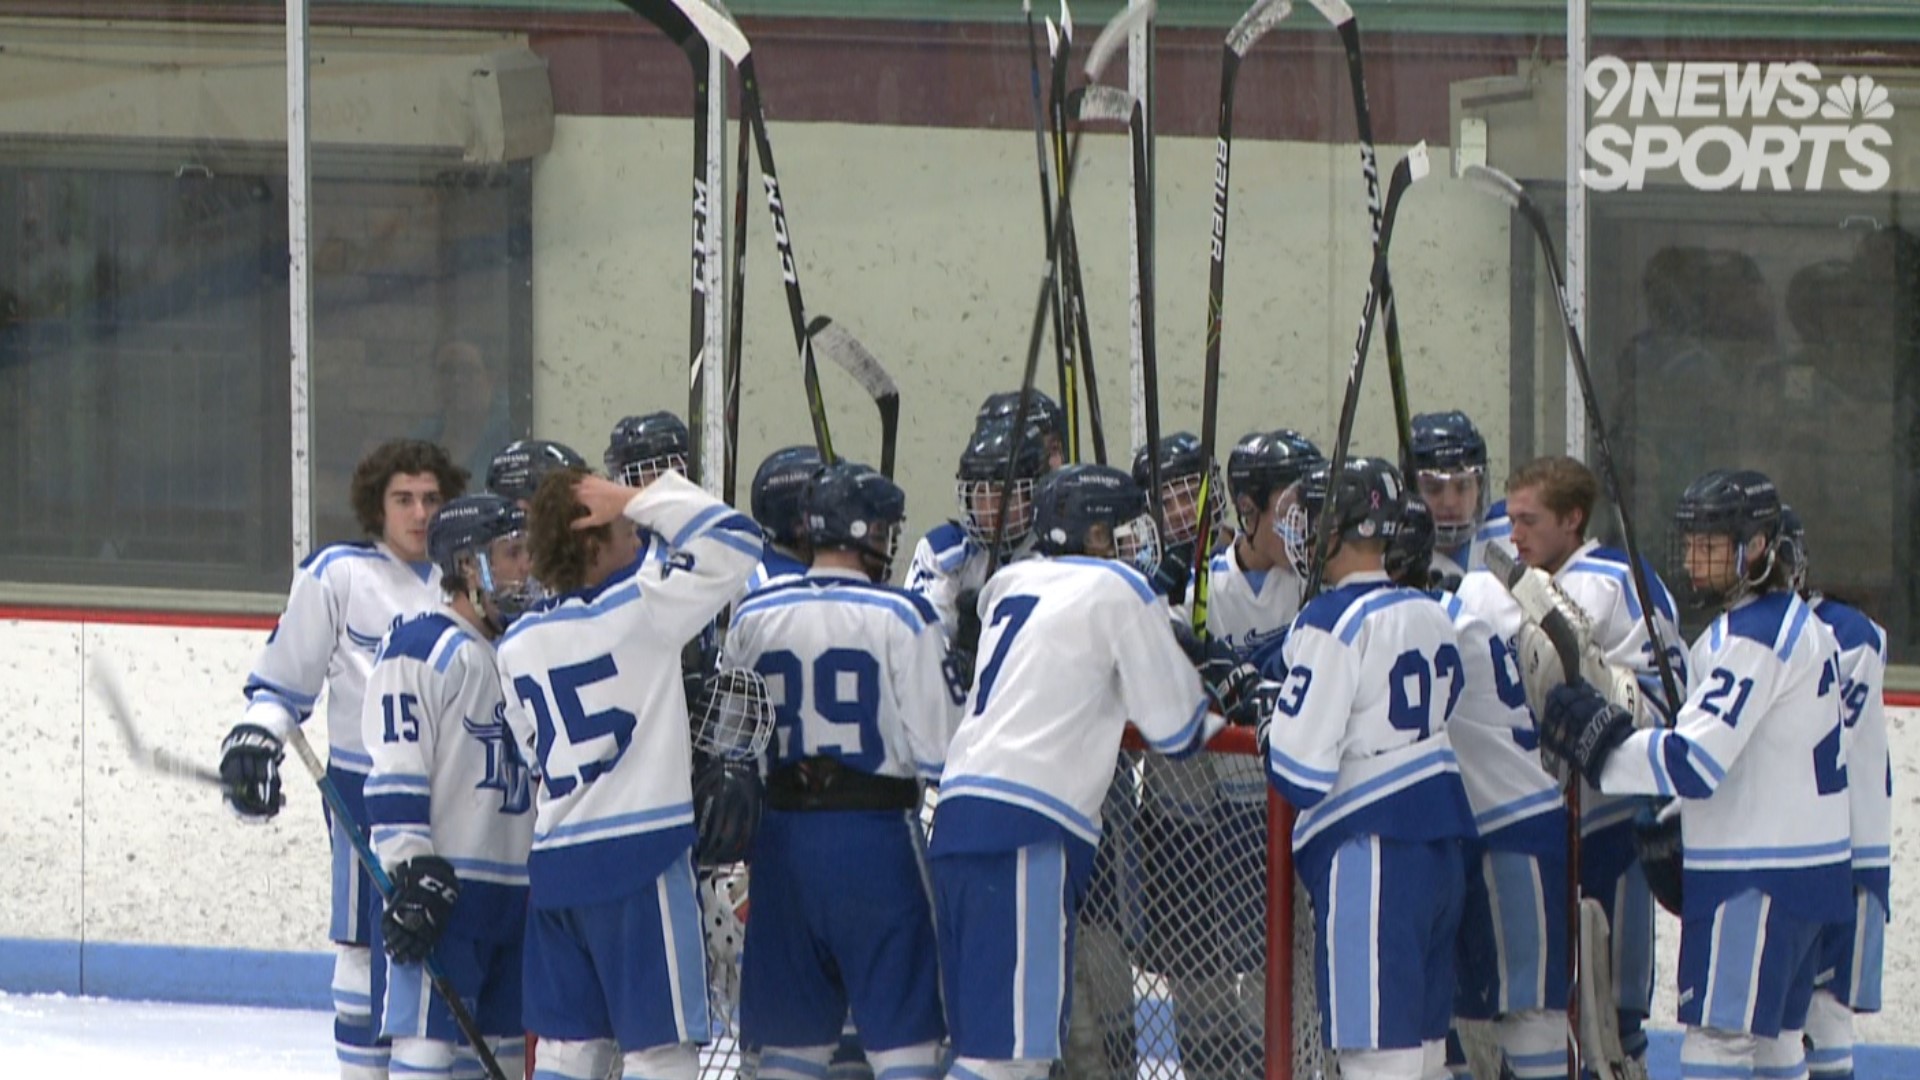 The Mustangs defeated the Skiers 6-1 in the opening round on Wednesday.